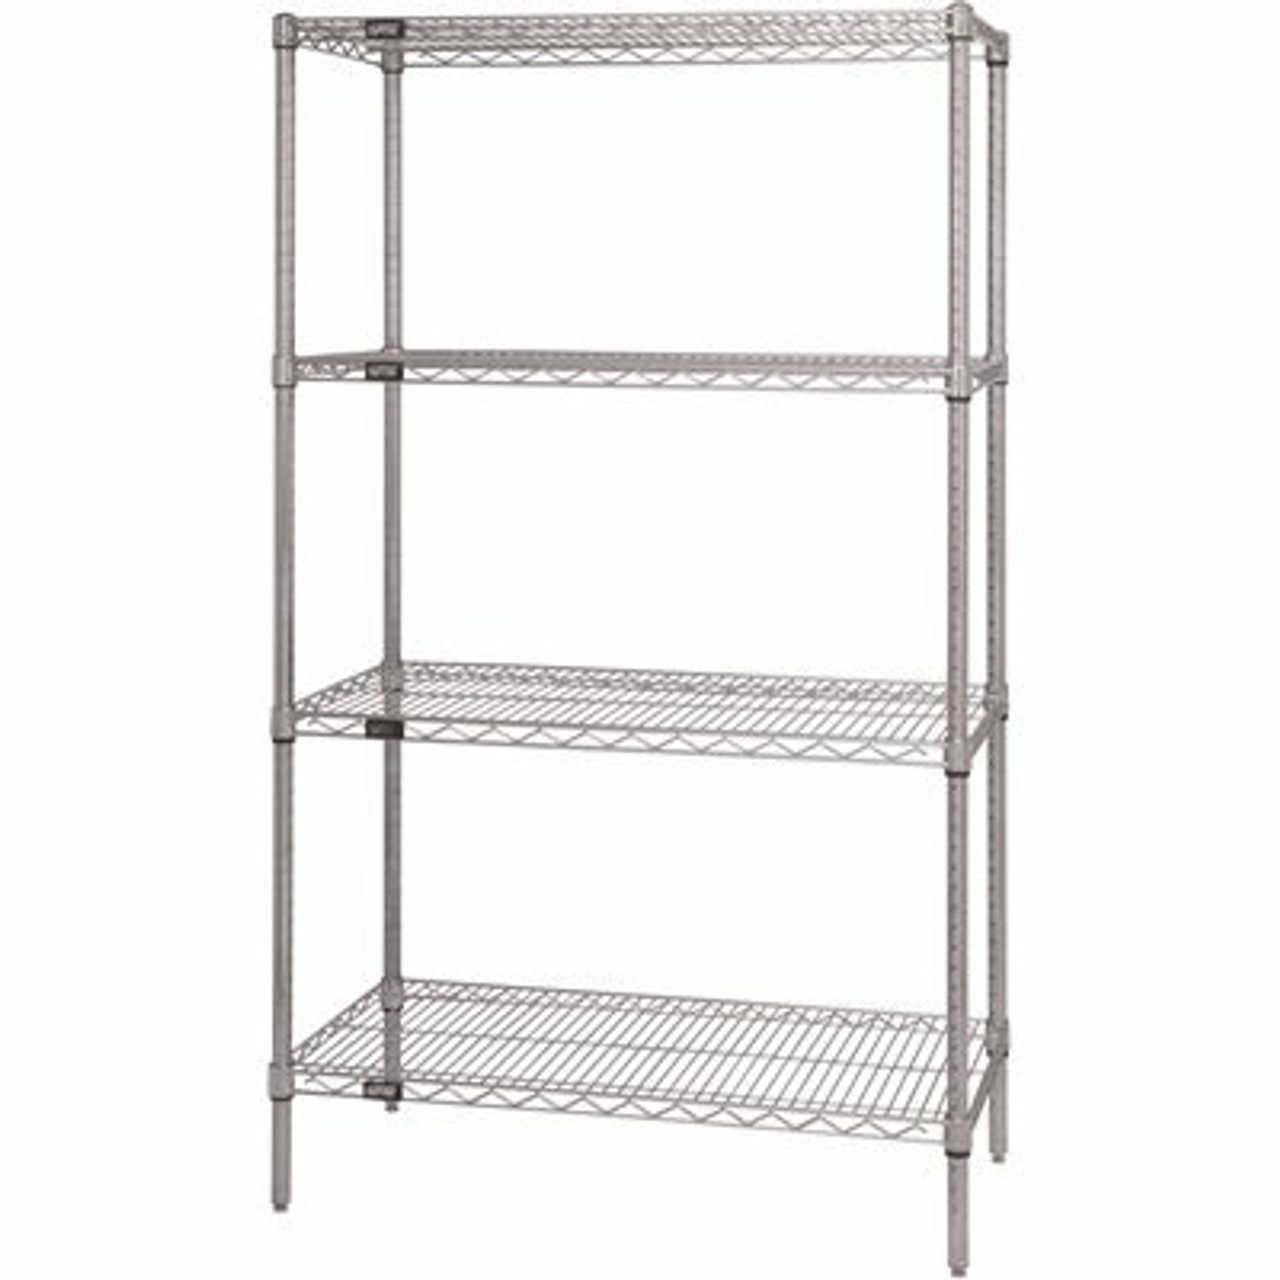 Quantum Storage Systems 12 in. X 60 in. X 74 in. Chrome Heavy-Duty Storage 4-Tier Wire Shelving